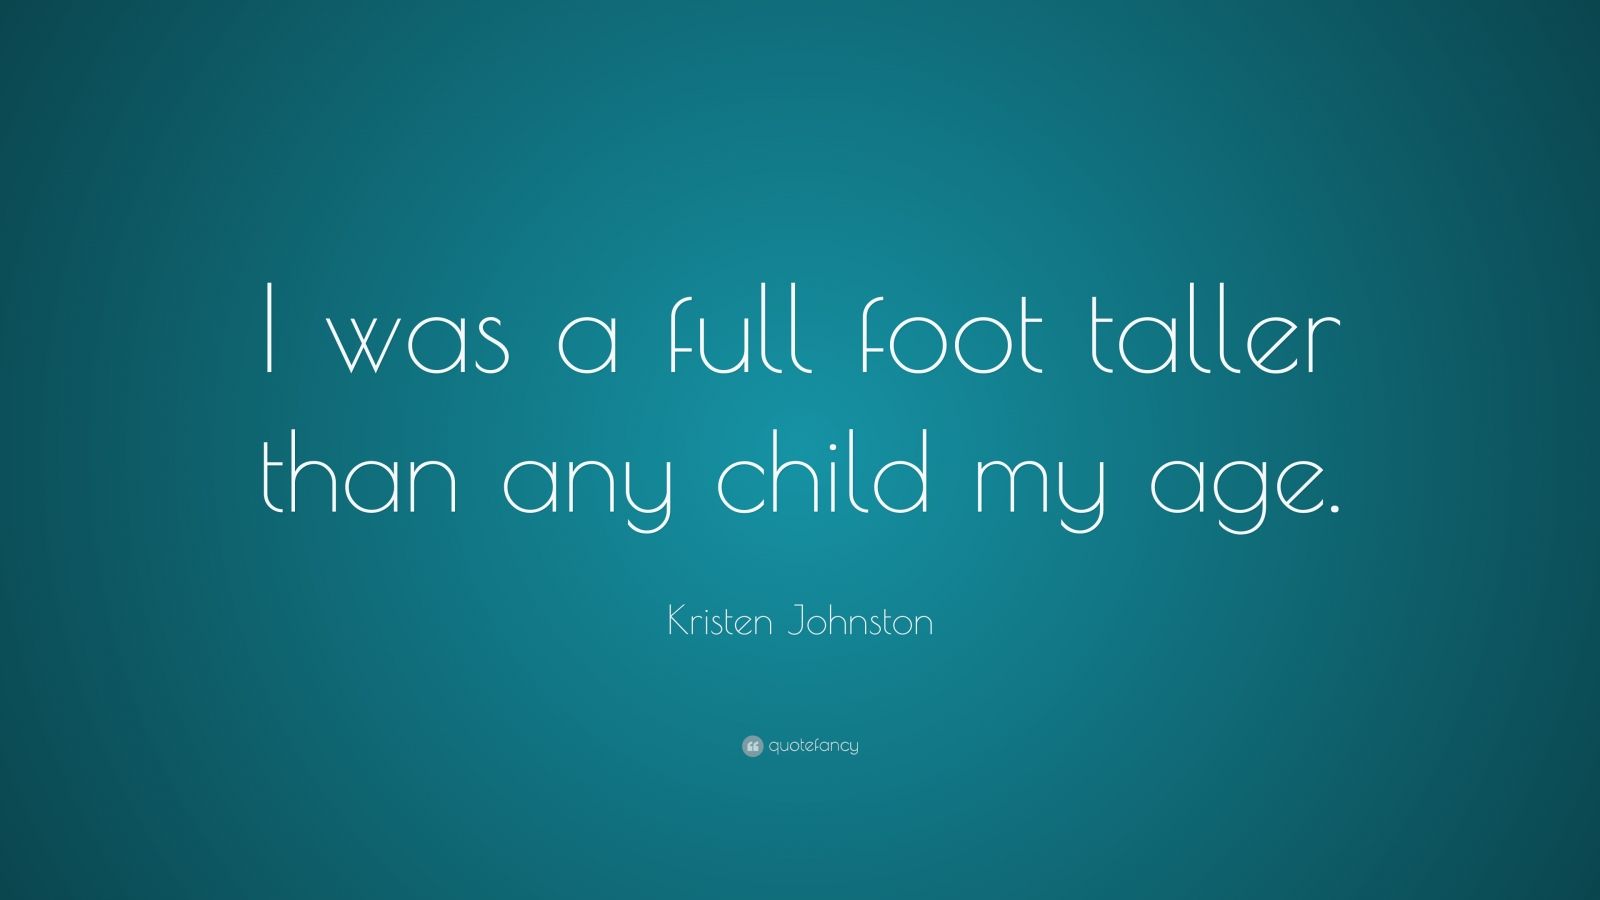 Kristen Johnston Quote: “I was a full foot taller than any child my age.”